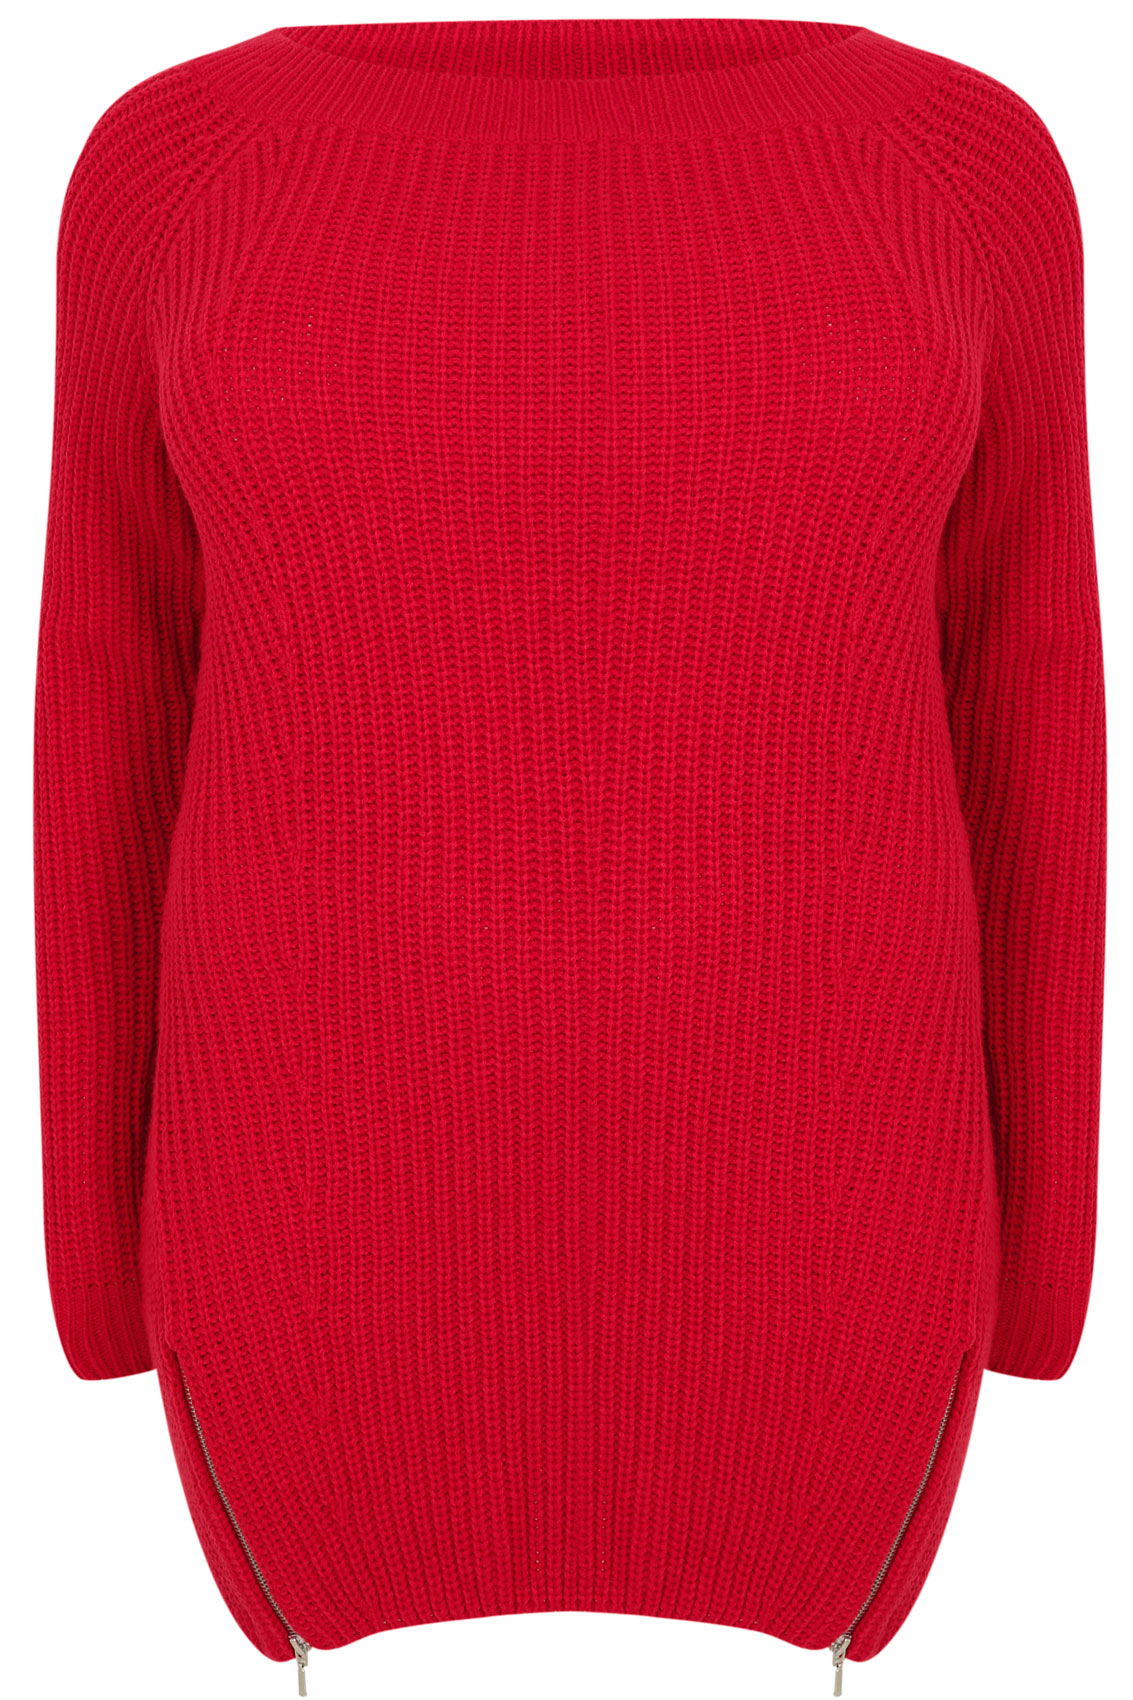 Red Knitted Jumper With Zip Hem Detail Plus Size 16 to 36